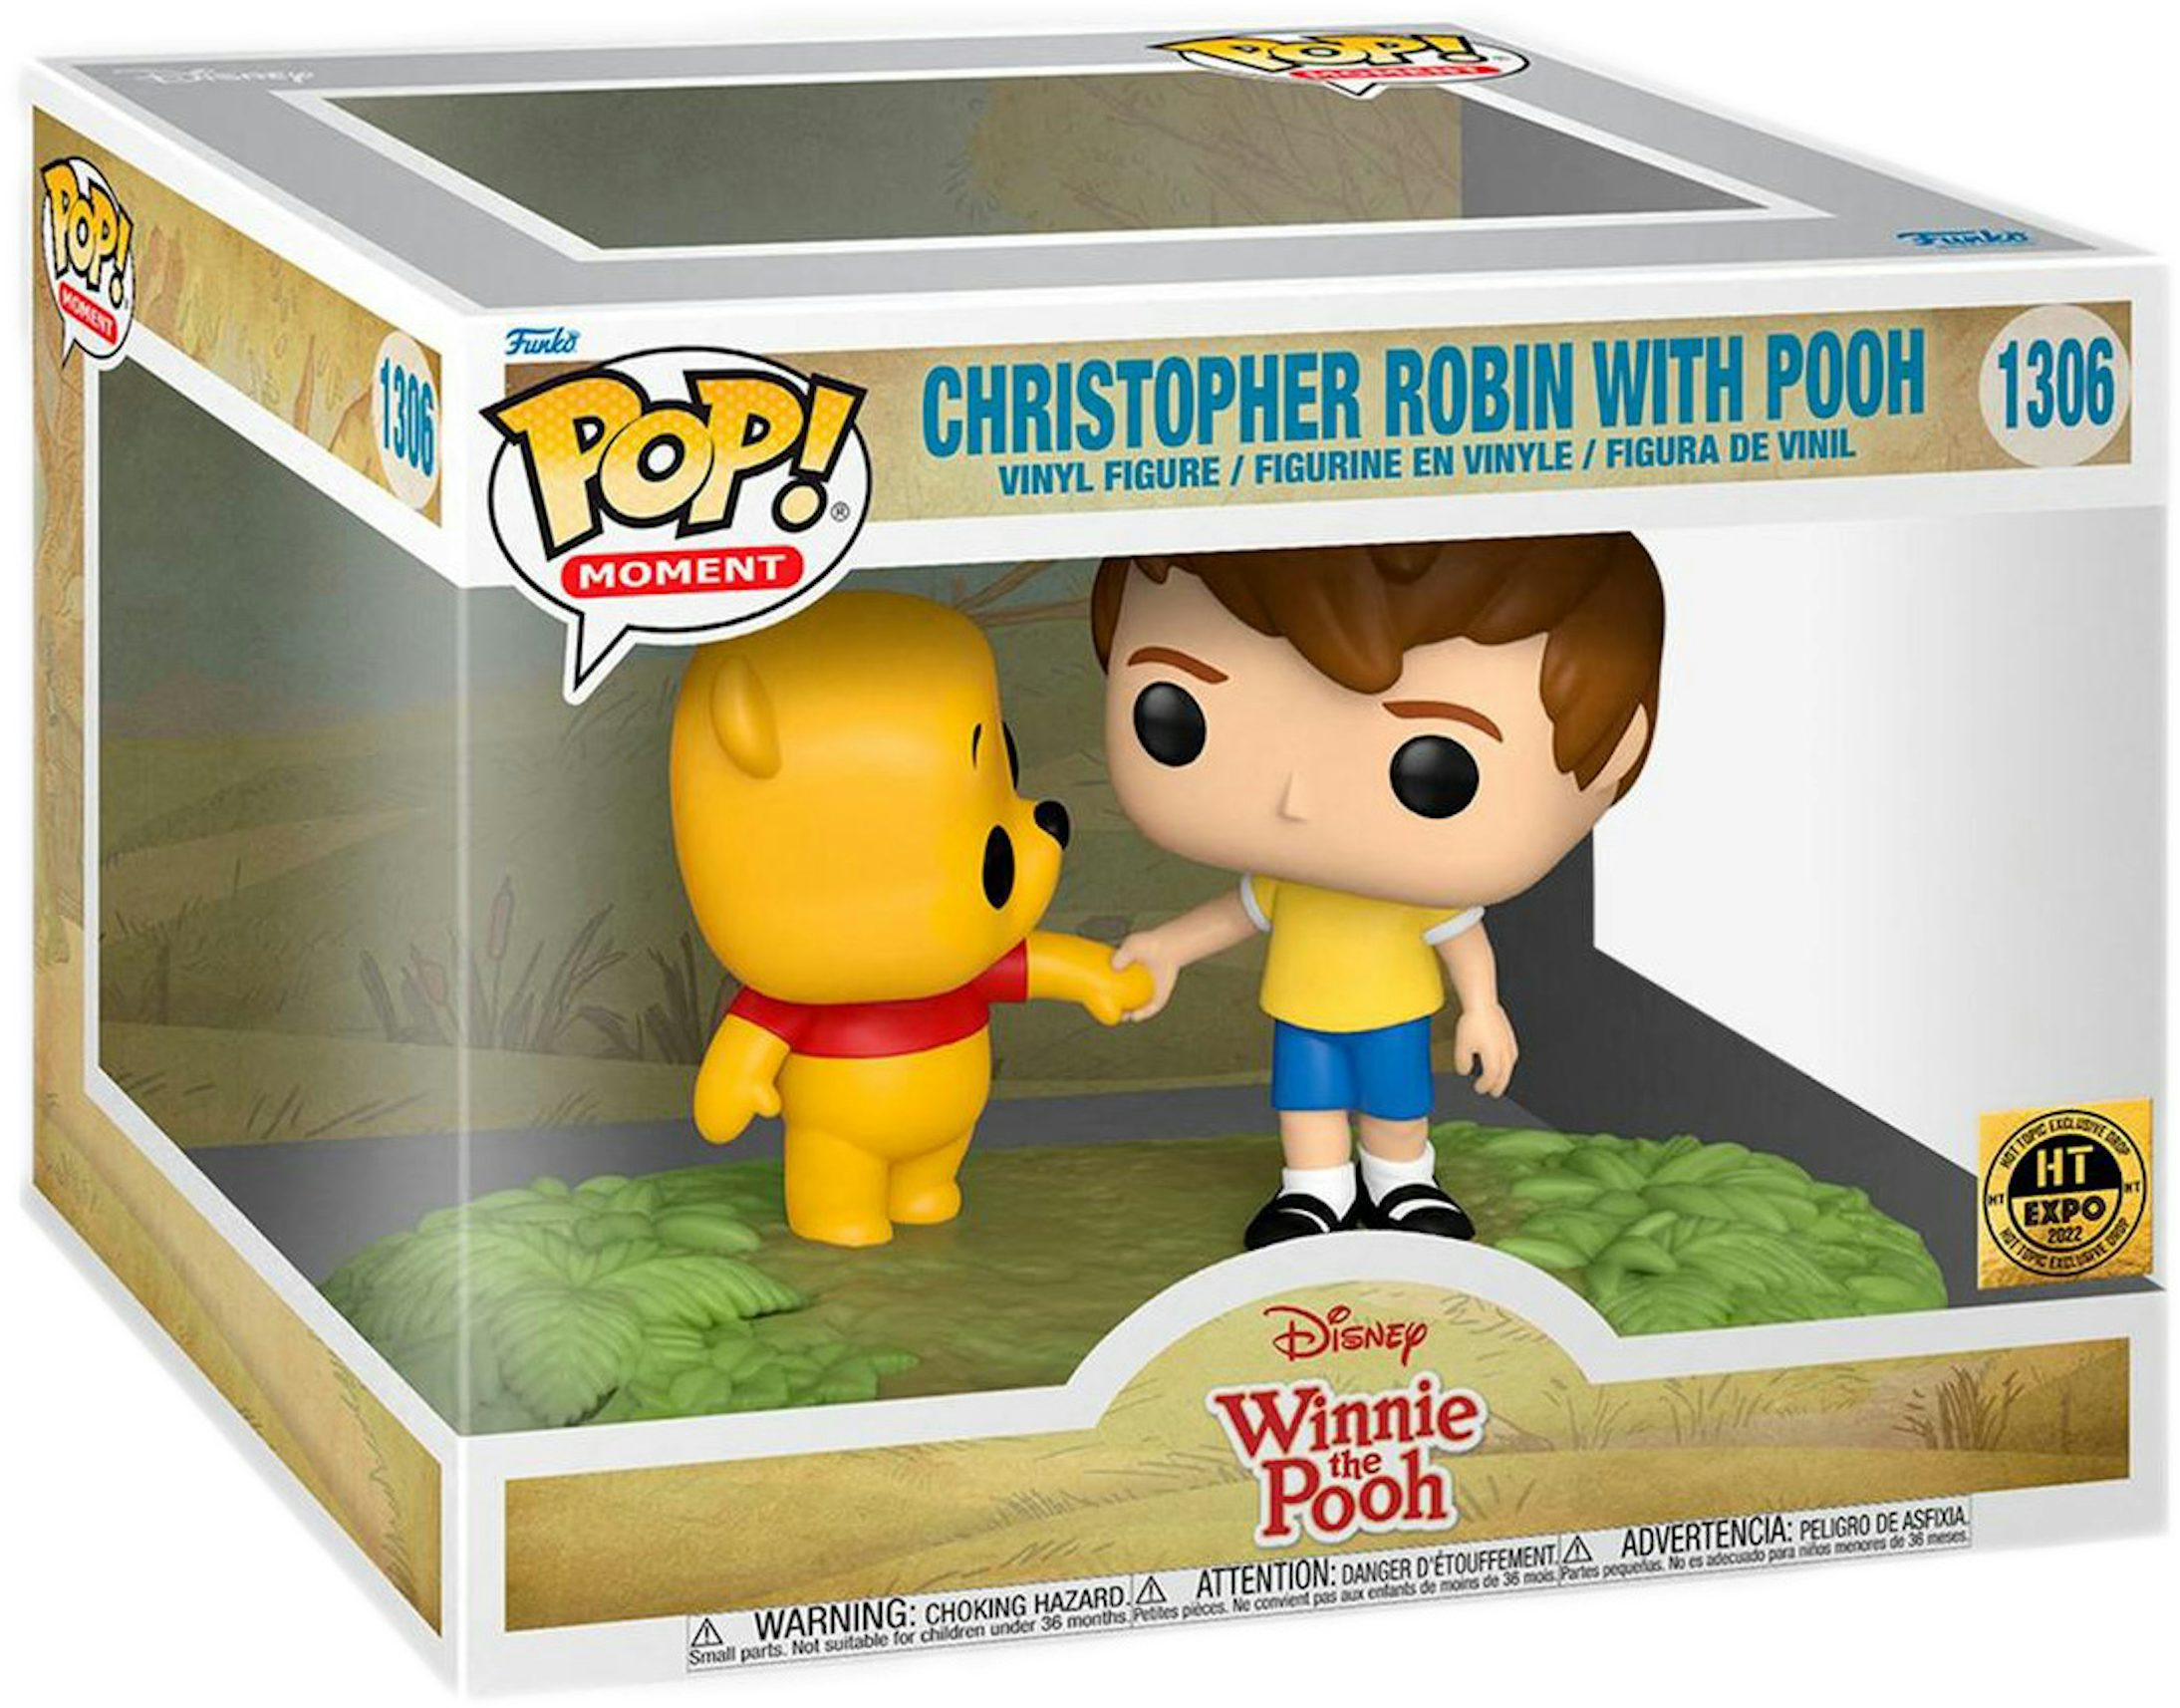 Funko Pop! Moment Disney Winnie the Pooh Christopher Robin with Pooh 2022  Hot Topic Expo Exclusive Figure #1306 - US